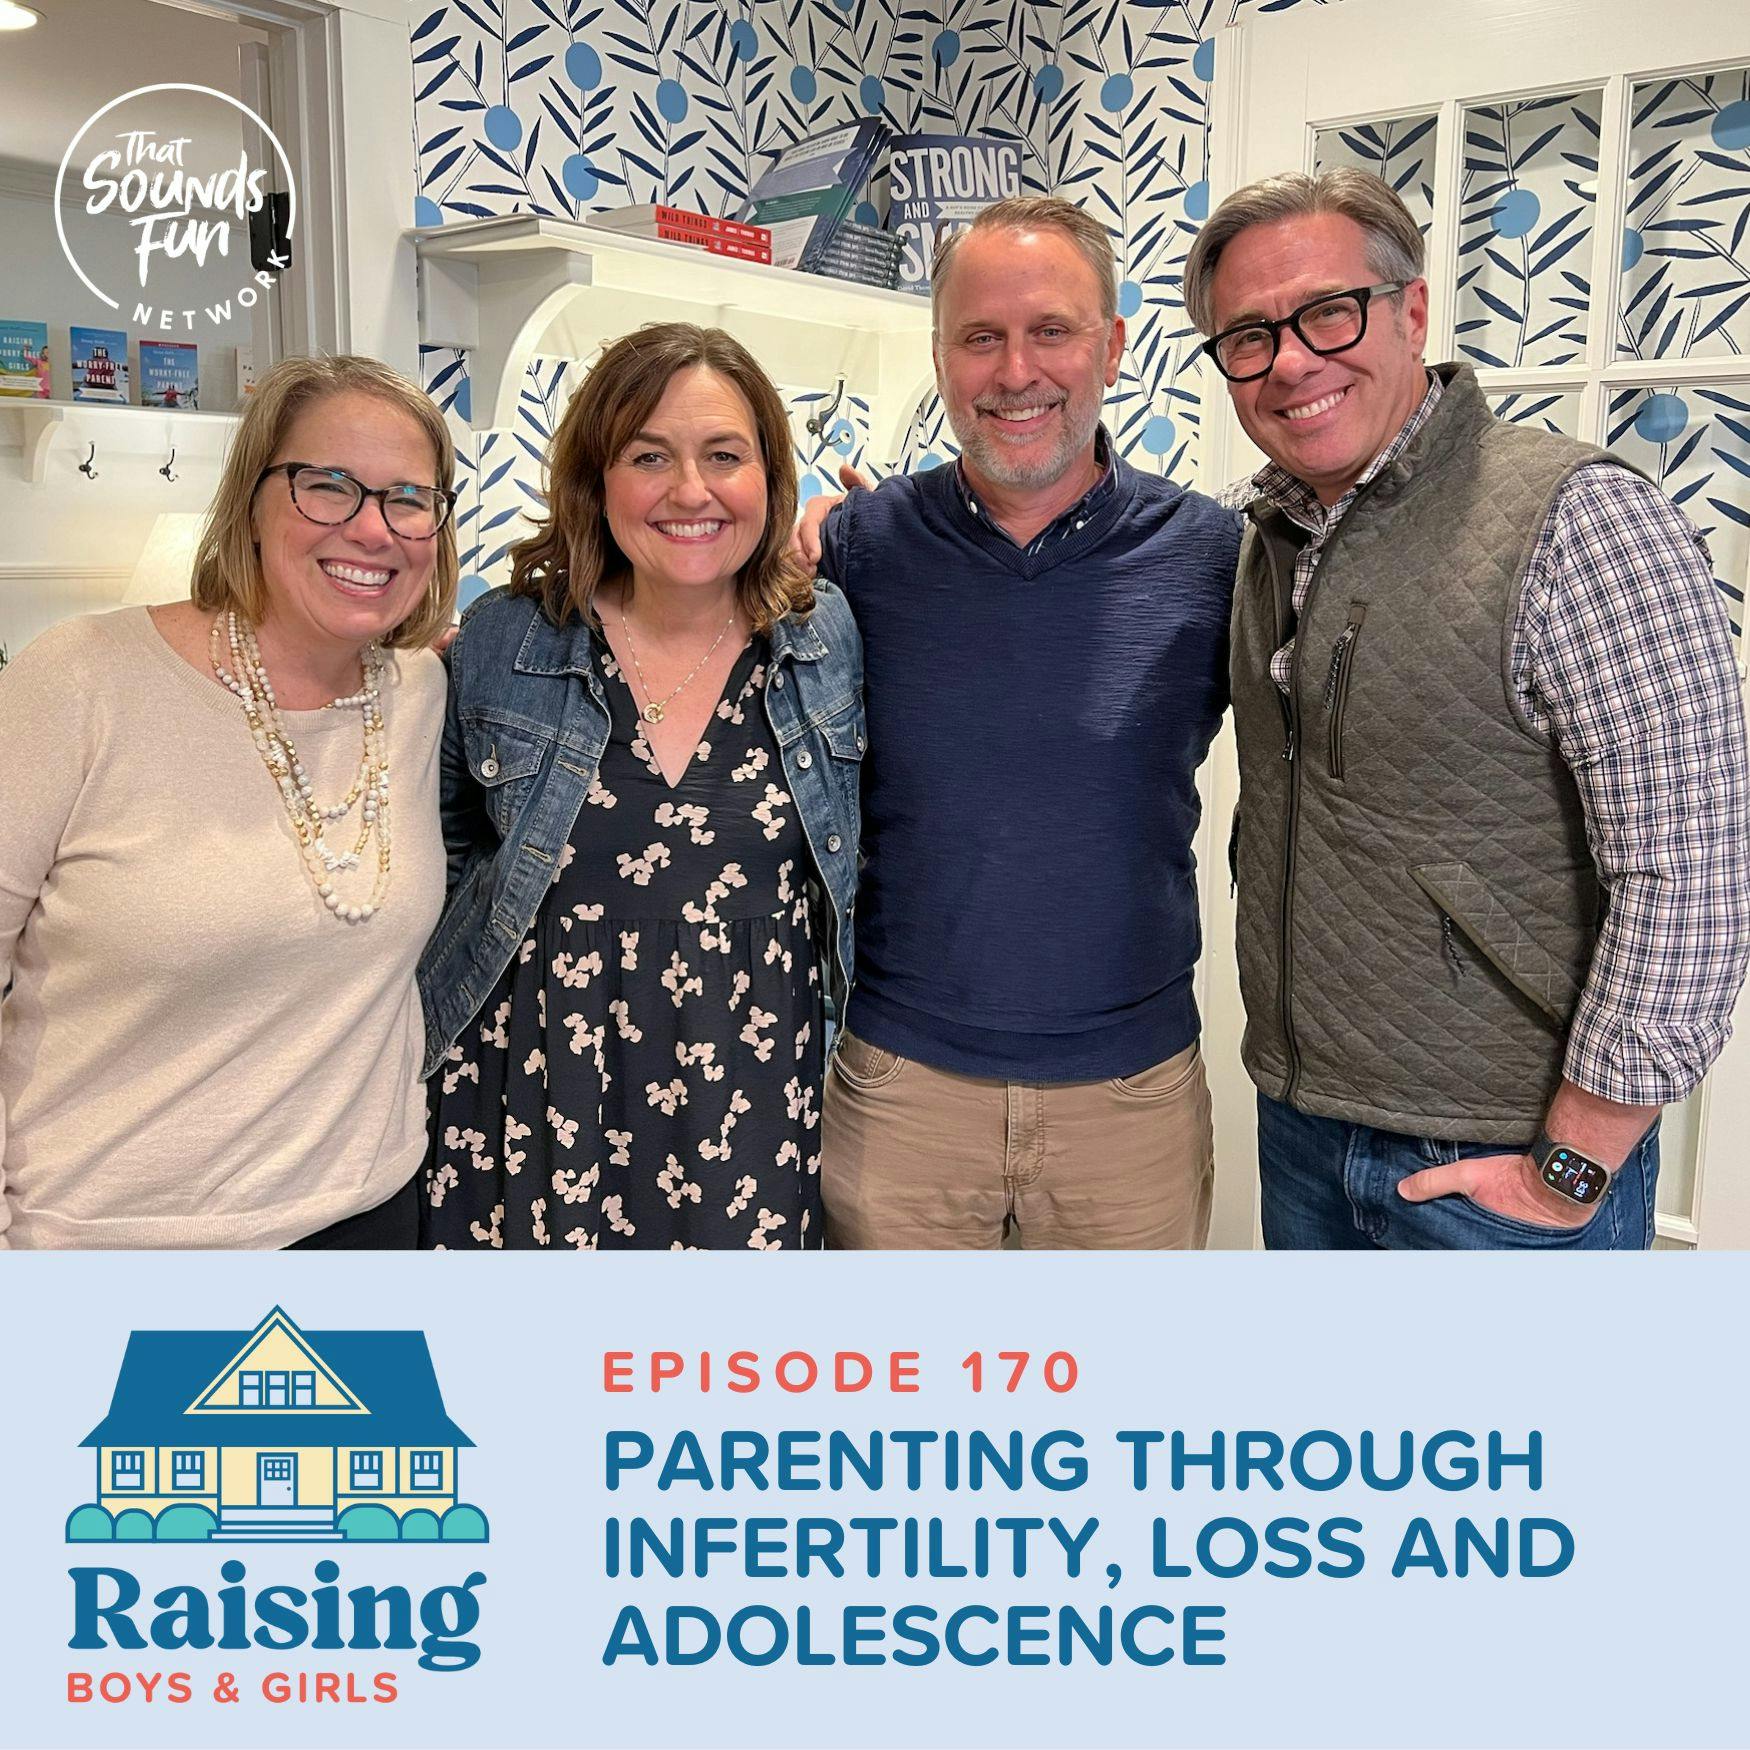 Episode 170: Parenting Through Infertility, Loss and Adolescence